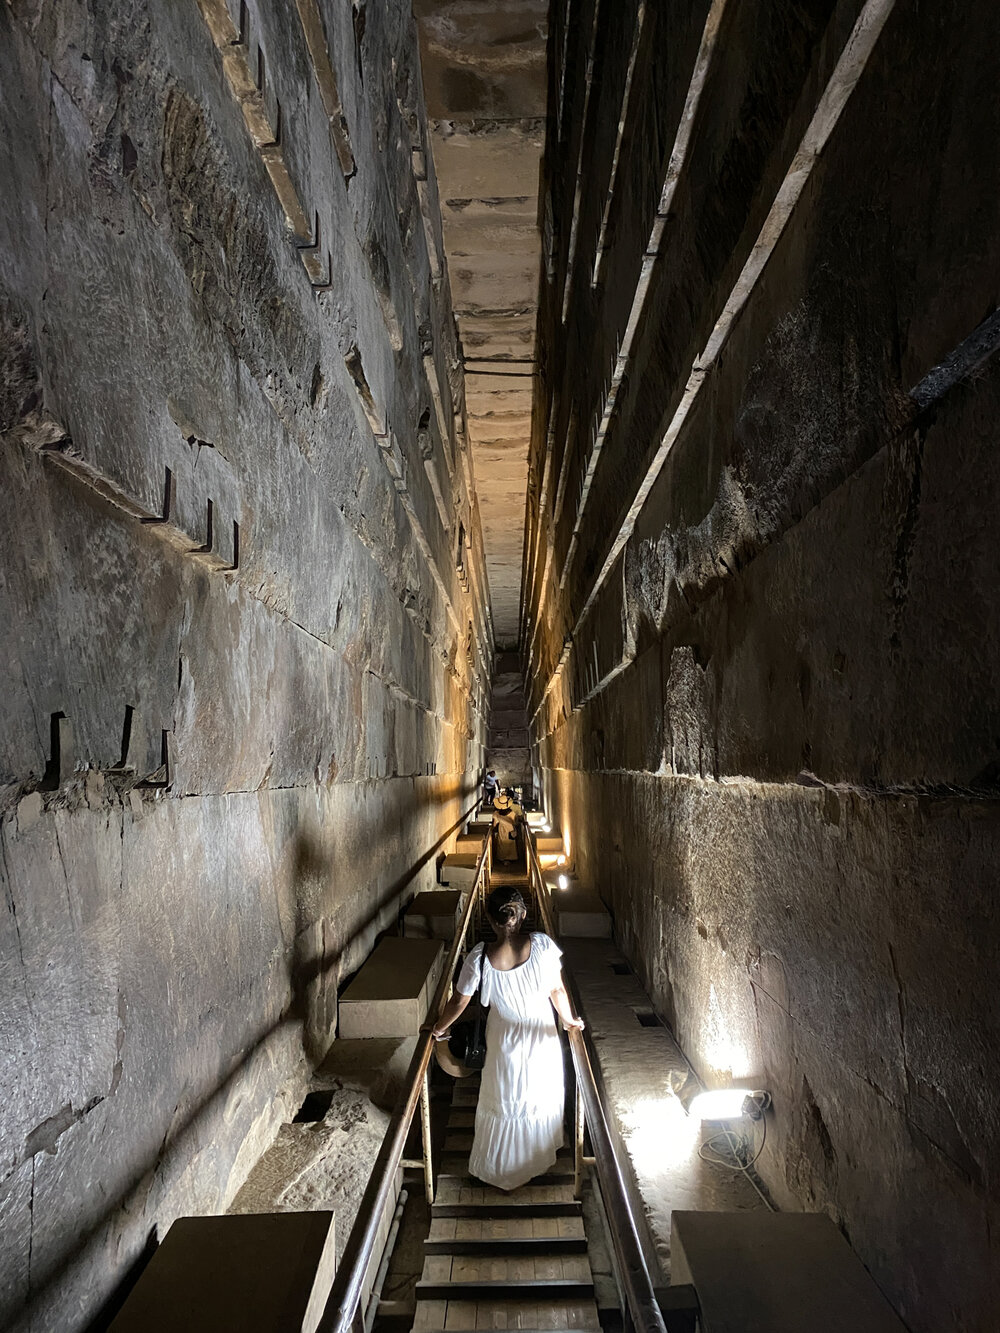 Grand Gallery Inside the Great Pyramid